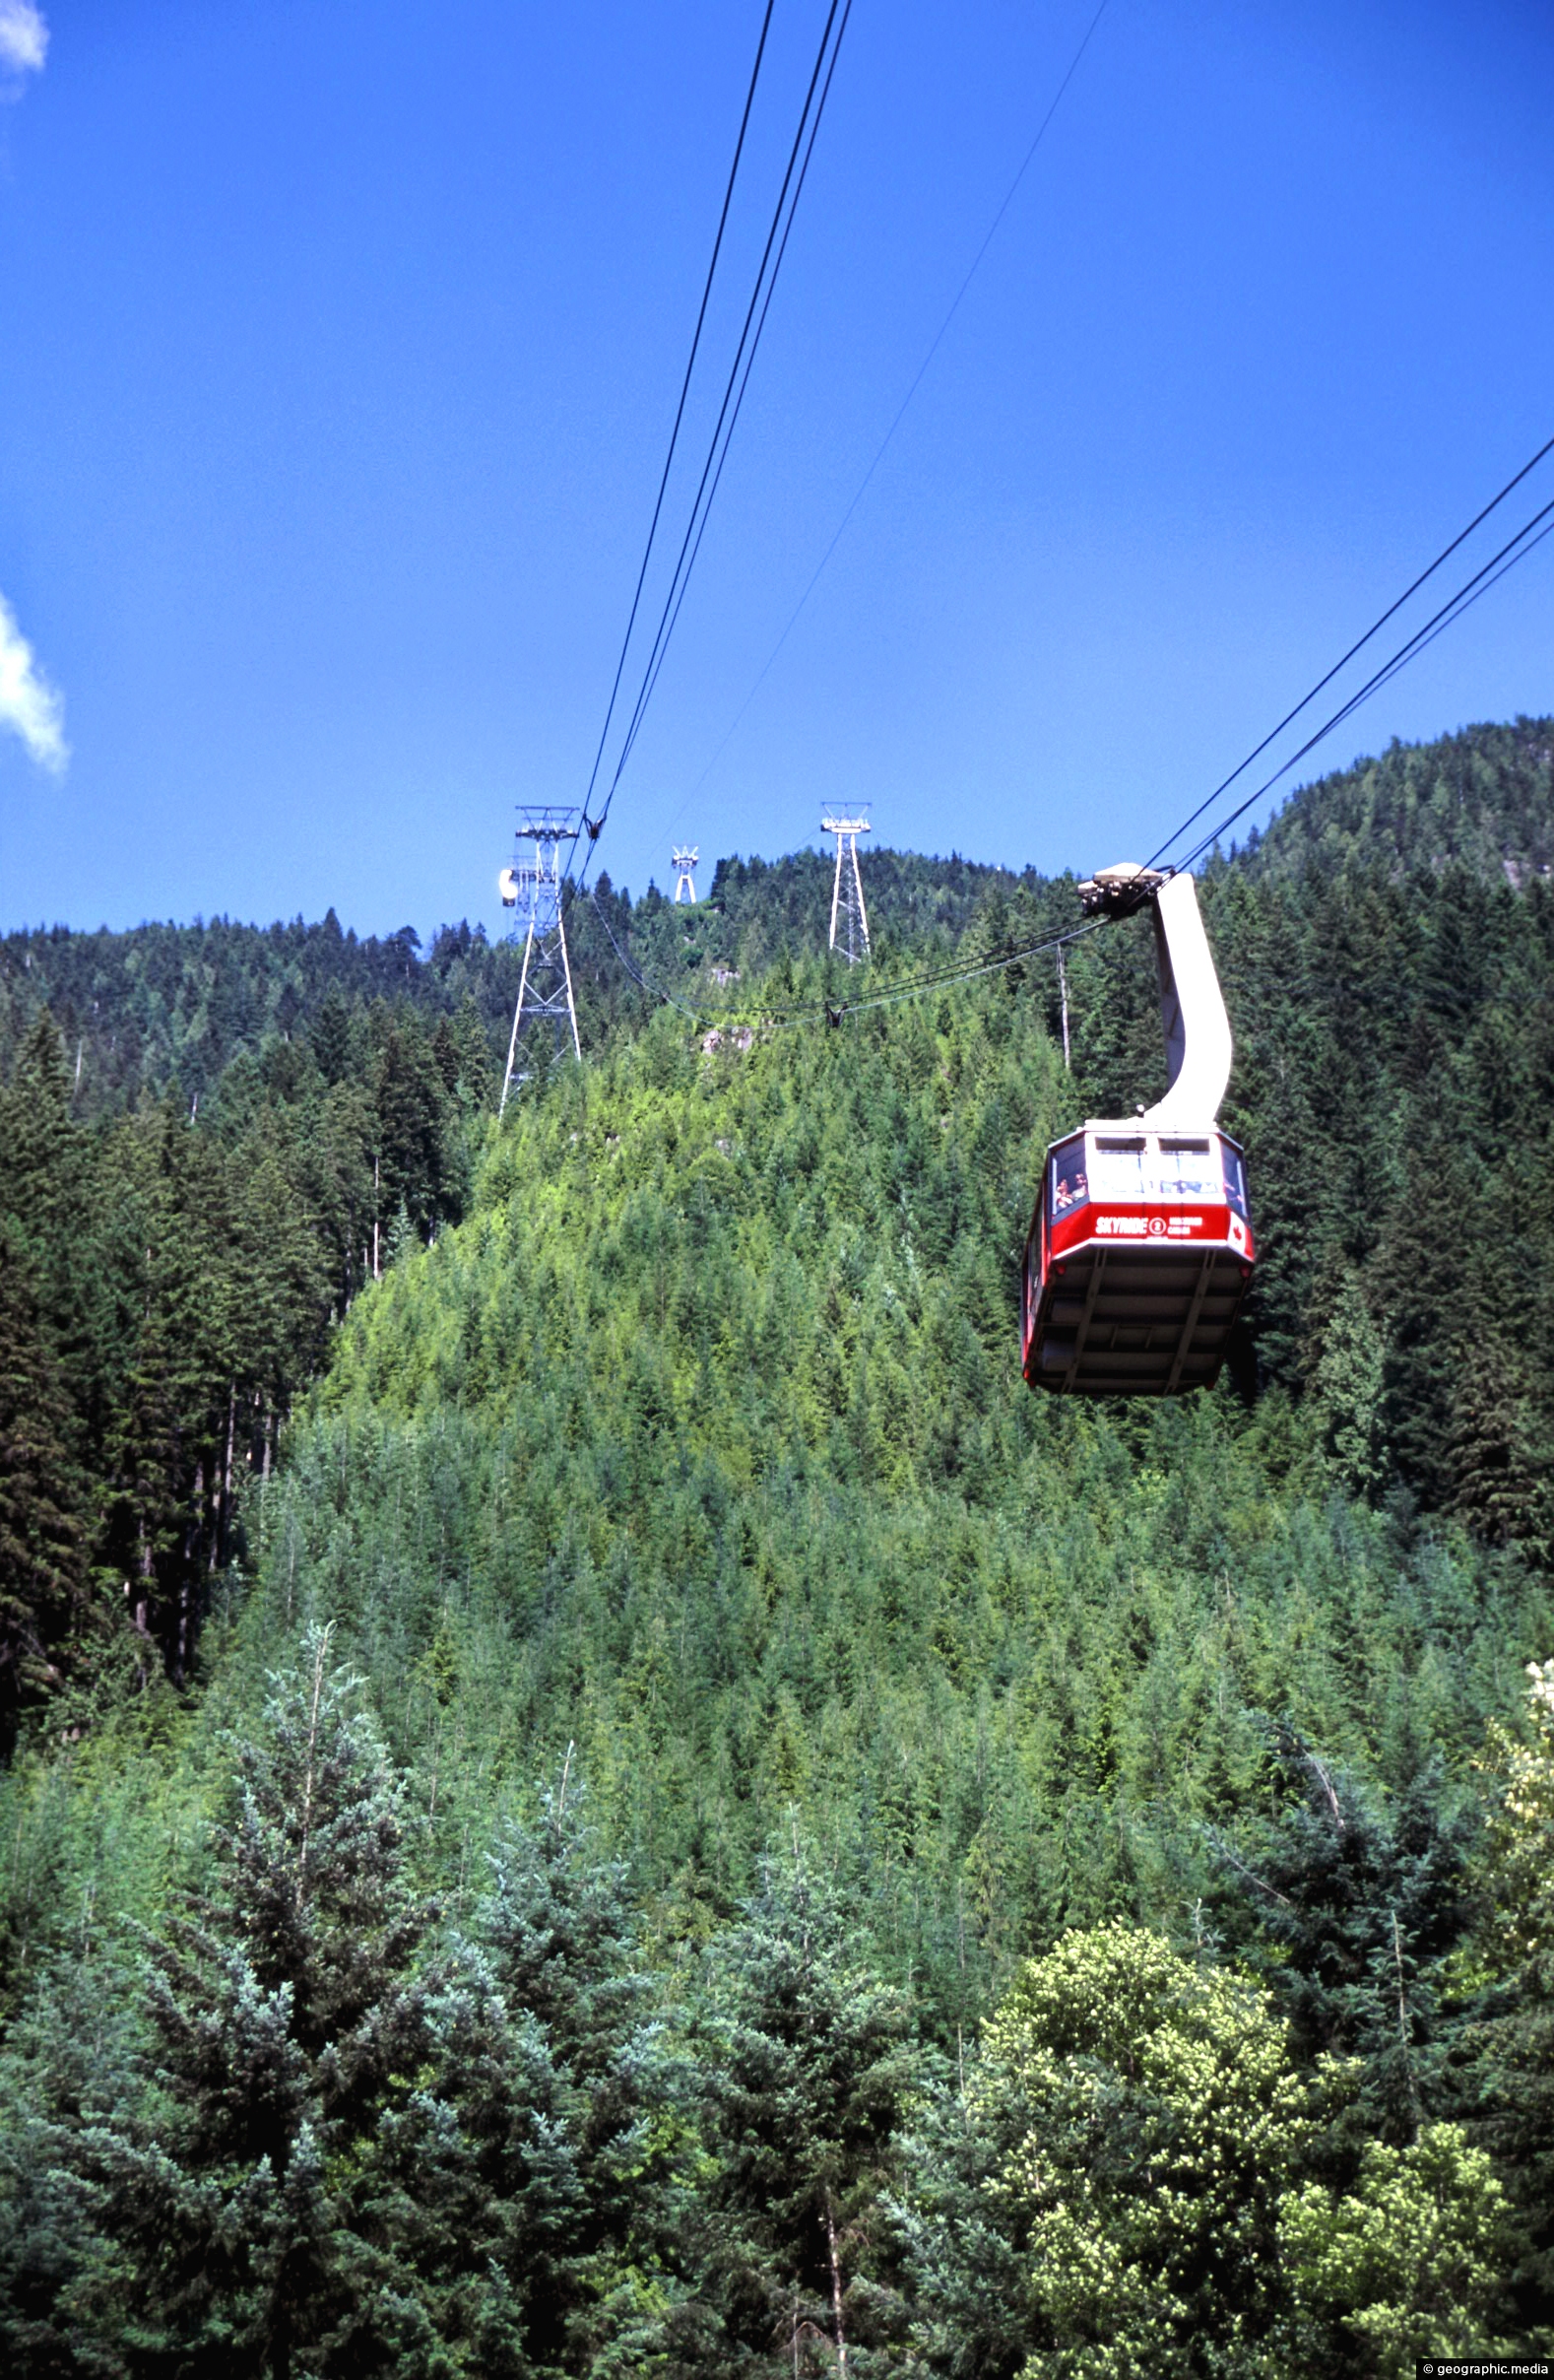 Grouse Mountain Skyride in Vancouver